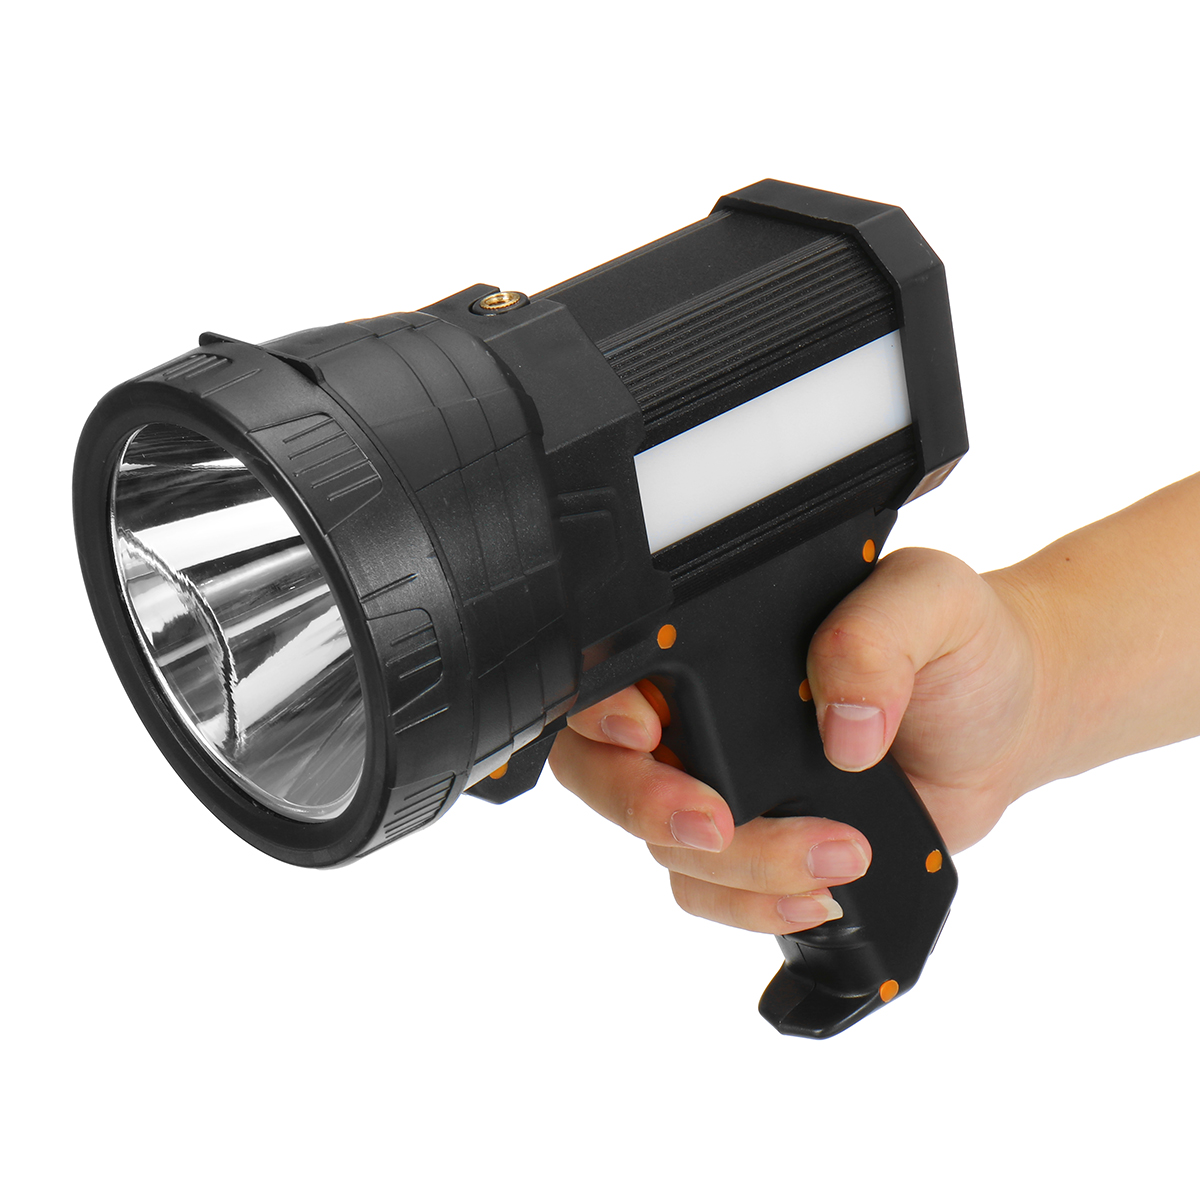 L2-Strong-LED-Spotlight-with-Tripod-USB-Rechargeable-Powerful-Searchlight-Portable-Handle-Flashlight-1756922-6